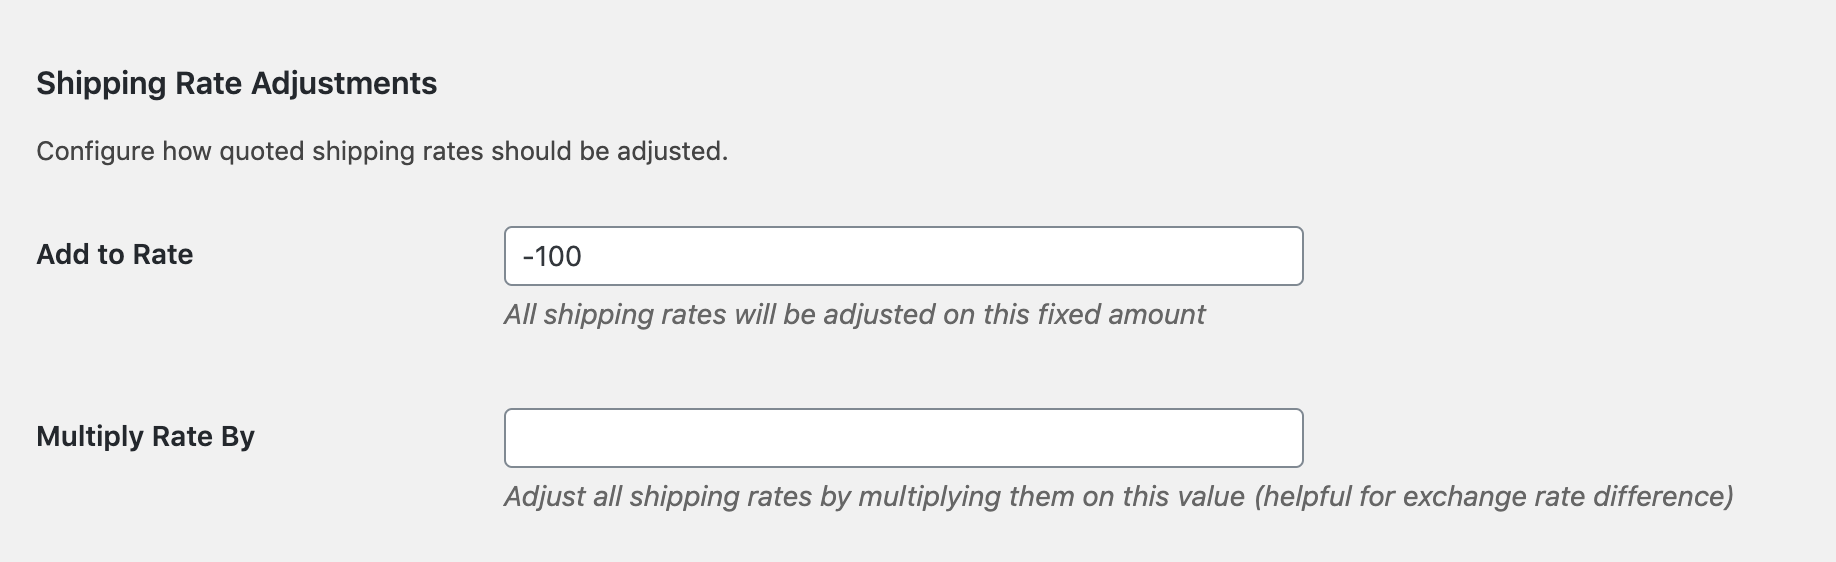 Configure shipping rate adjustments